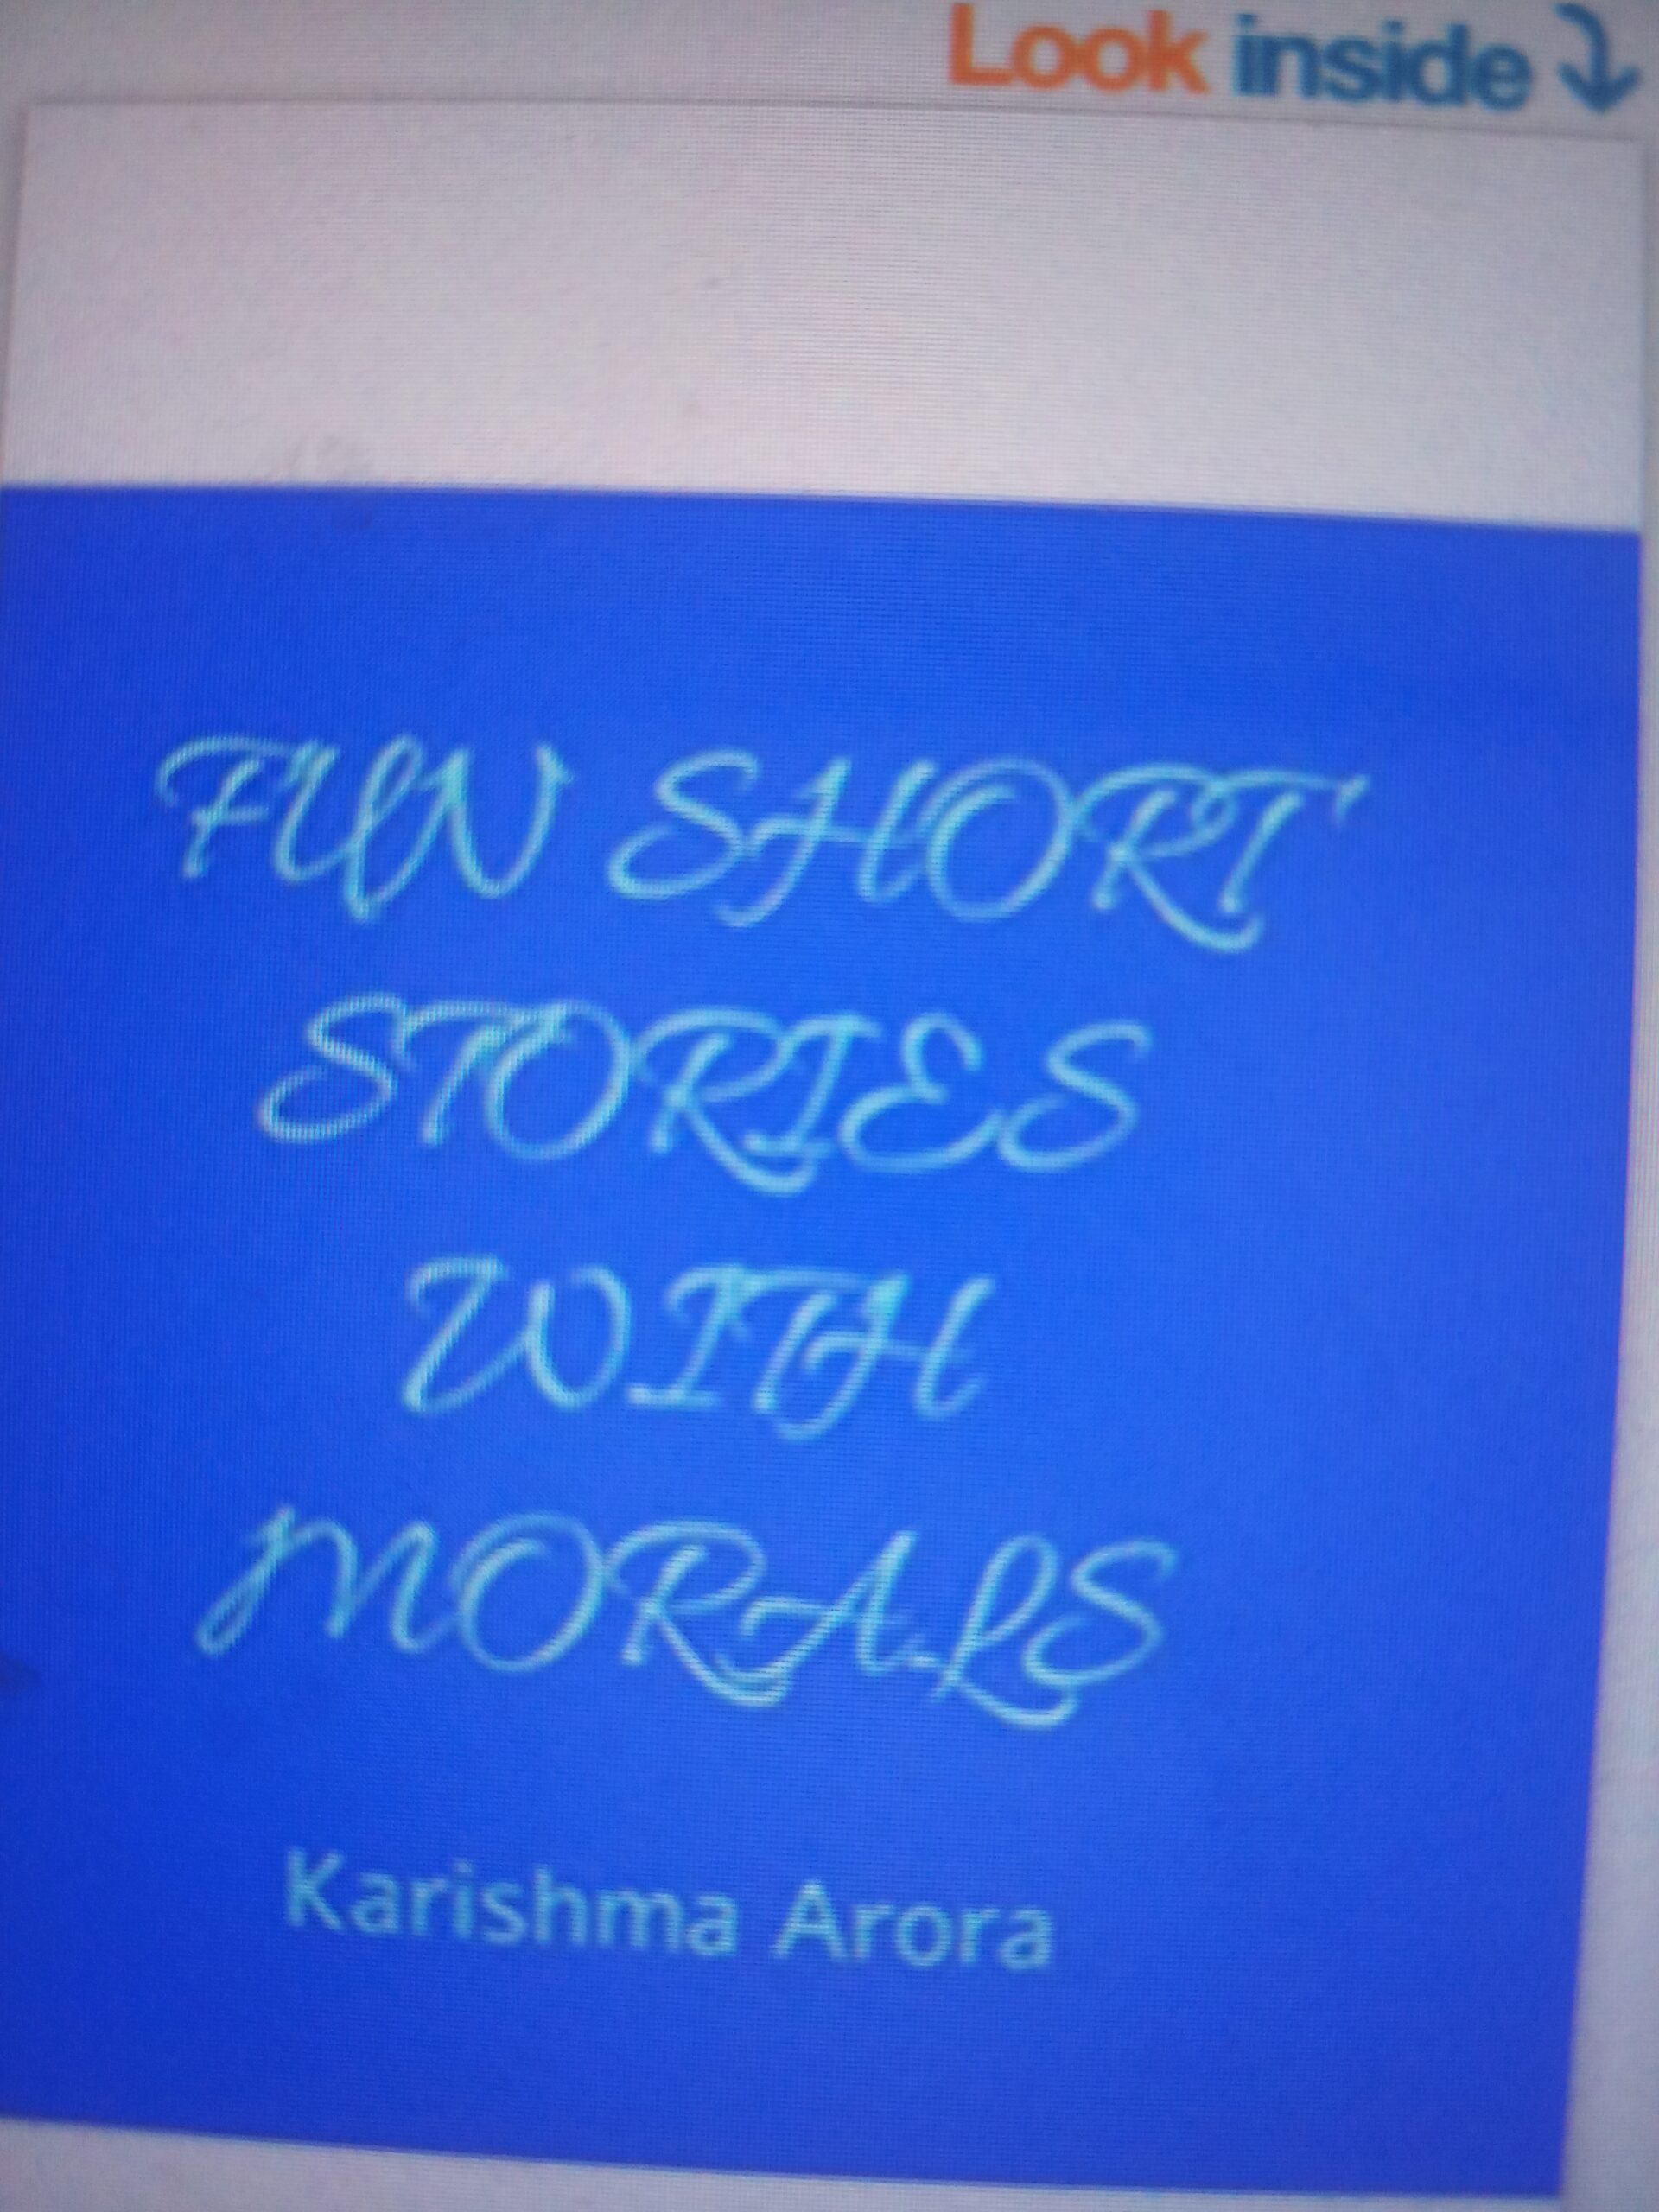 Fun Short Stories with Morals